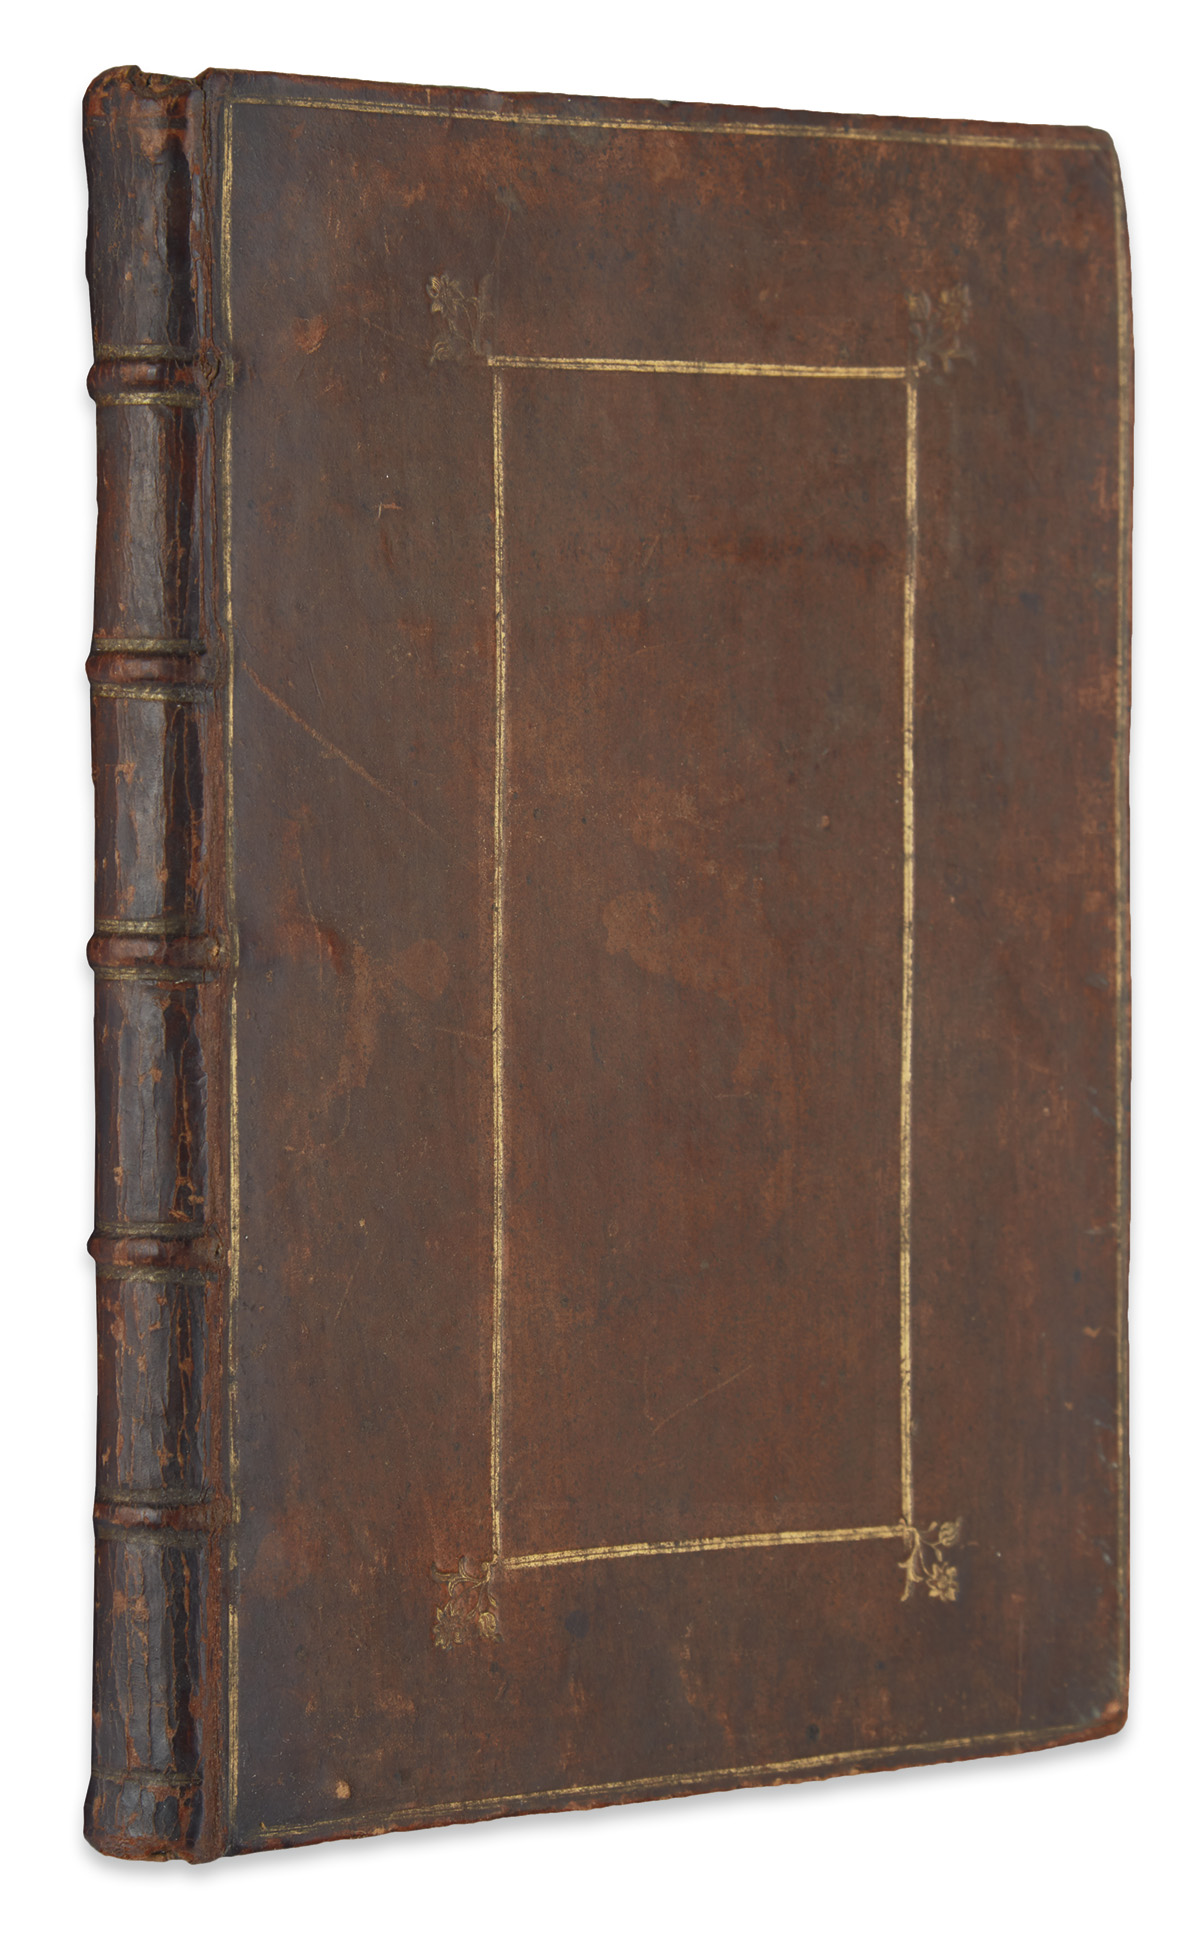 BIBLE IN ENGLISH.  The New Testament.  1603